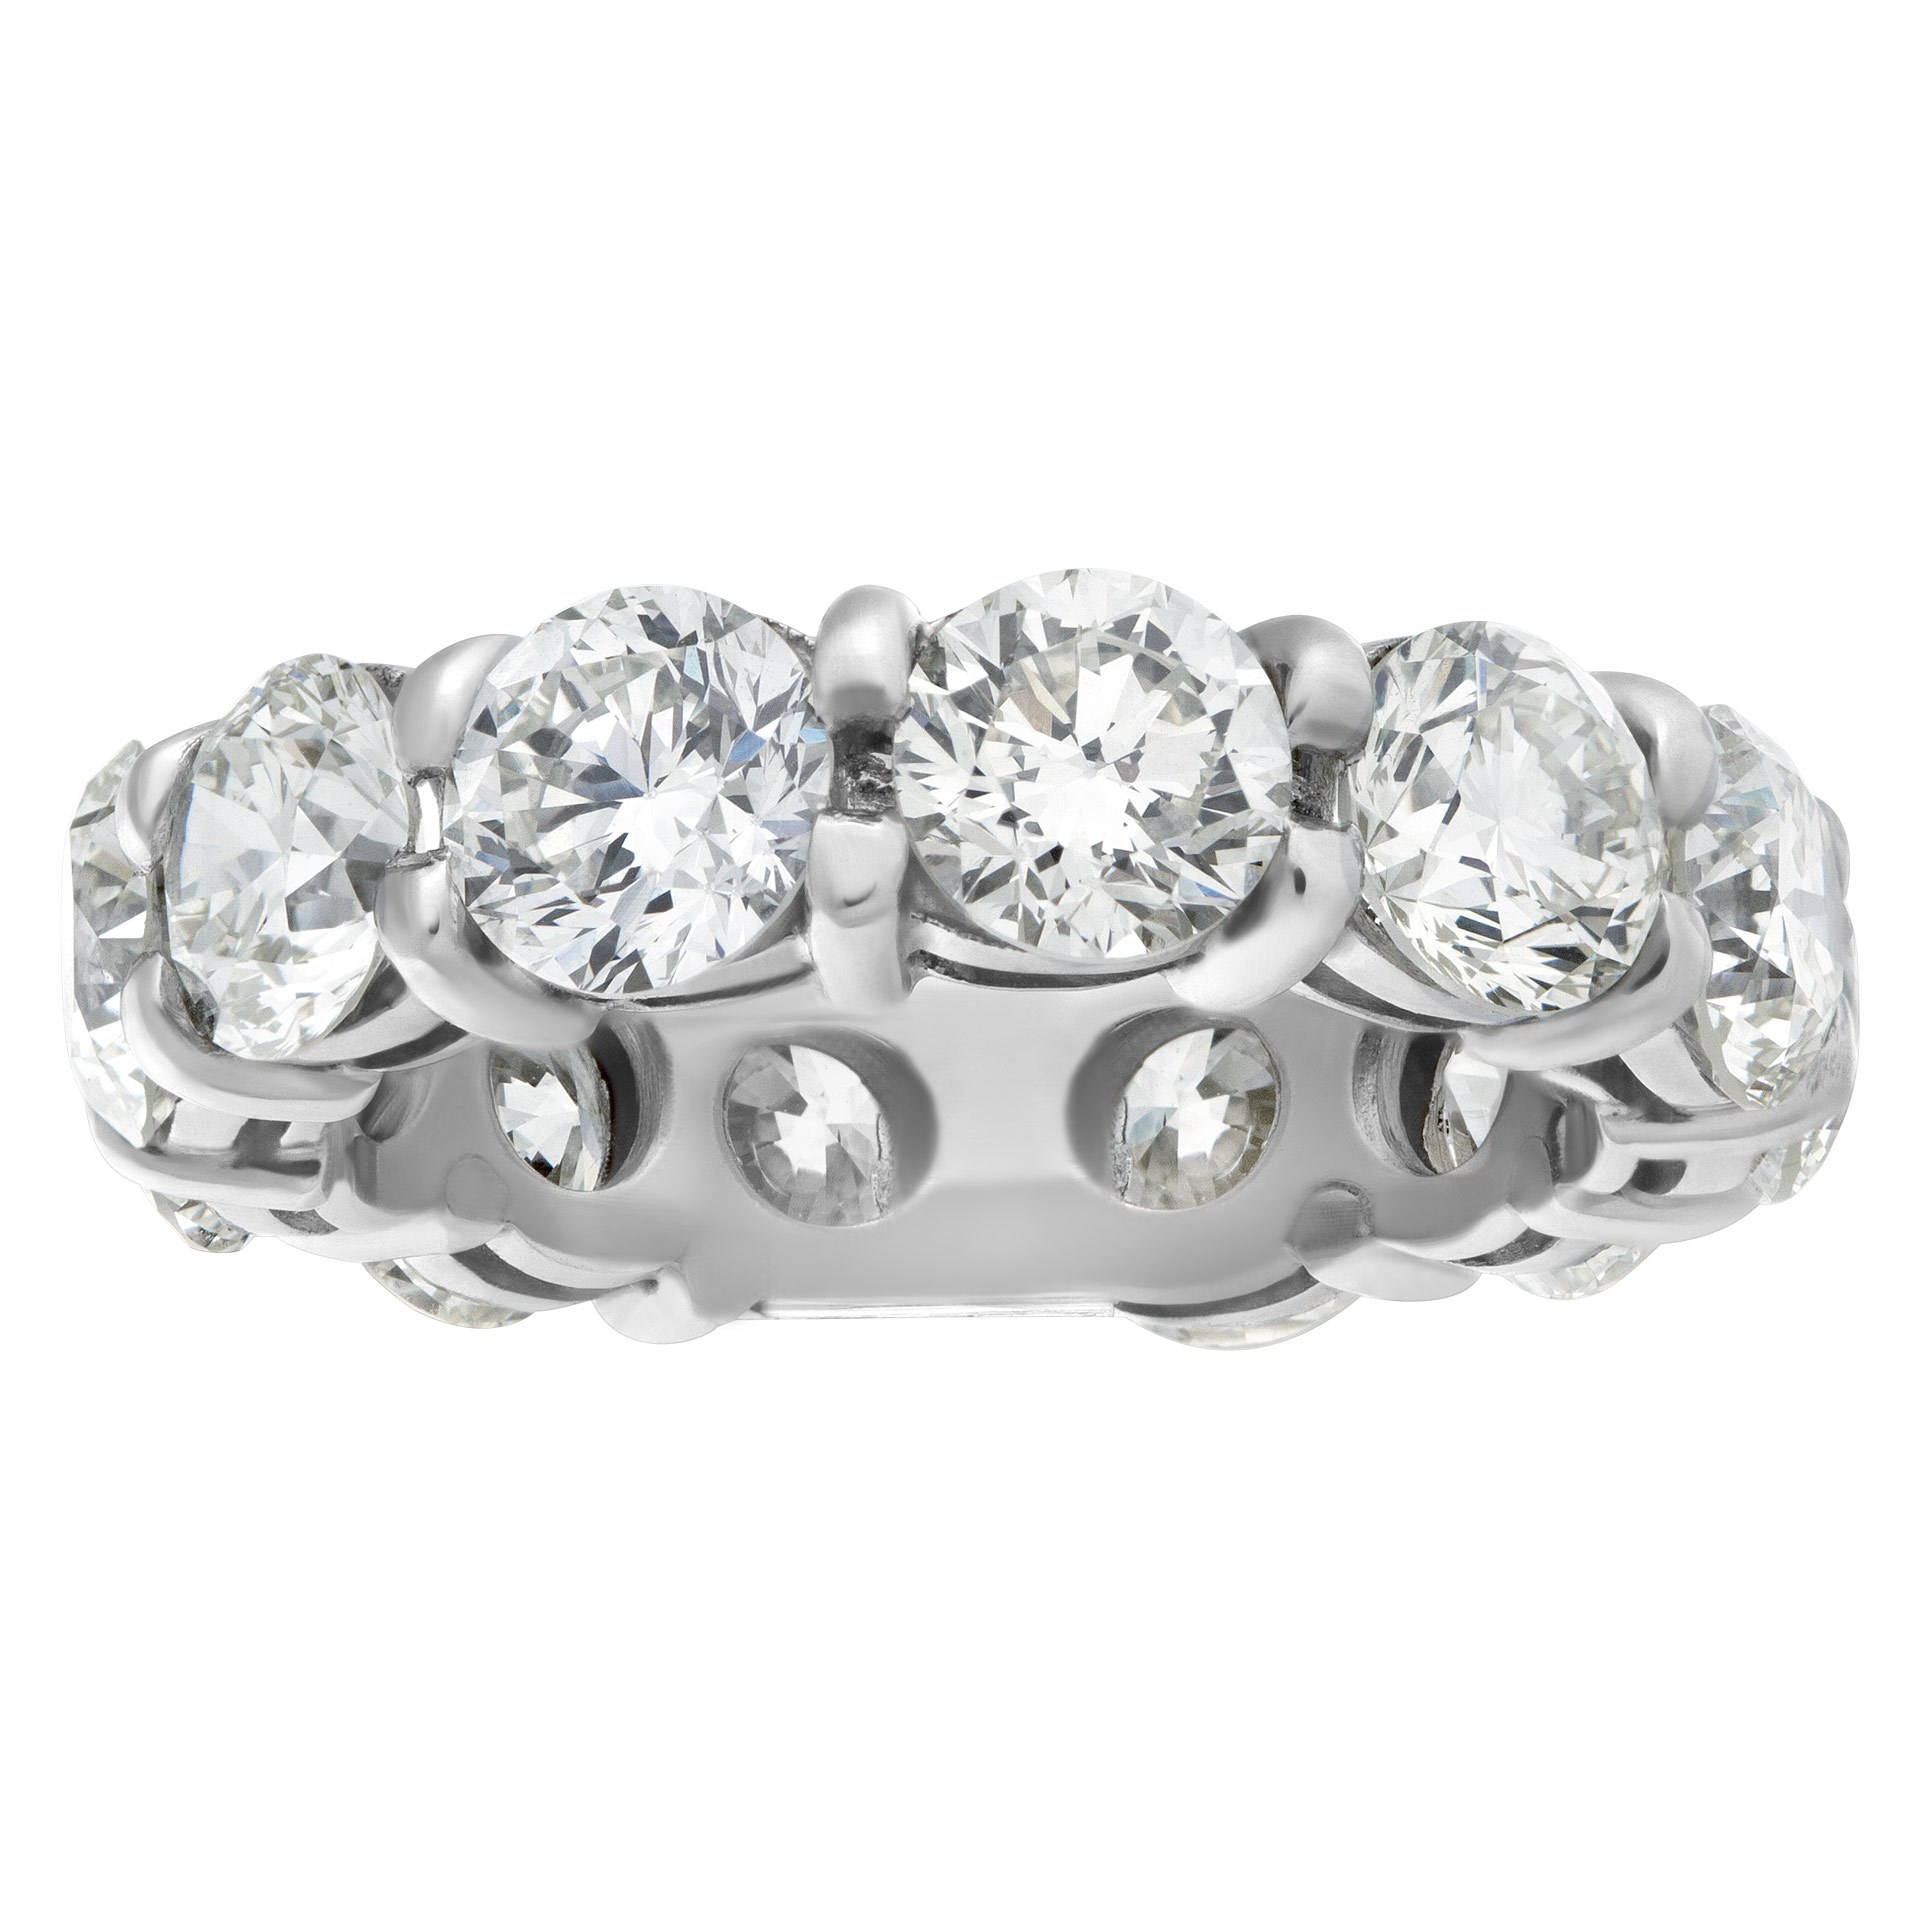 Diamond Eternity Band and Ring platinum custom made with approximately 8.50 carats in diamonds (K-M color, VS-SI Clarity)